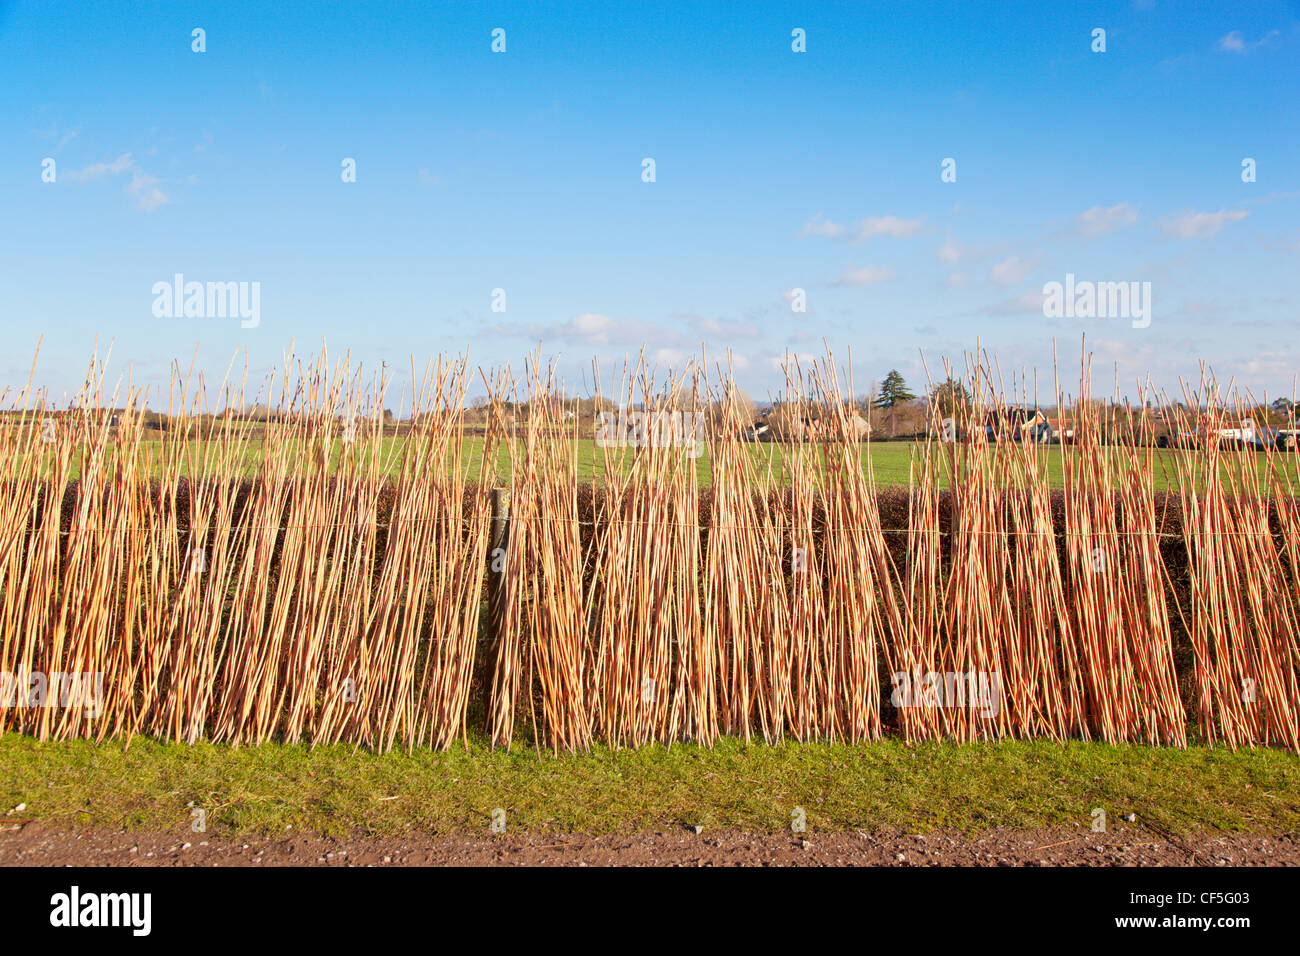 Withies, flexible willow stems used for typically for thatching, drying in the sun. Stock Photo